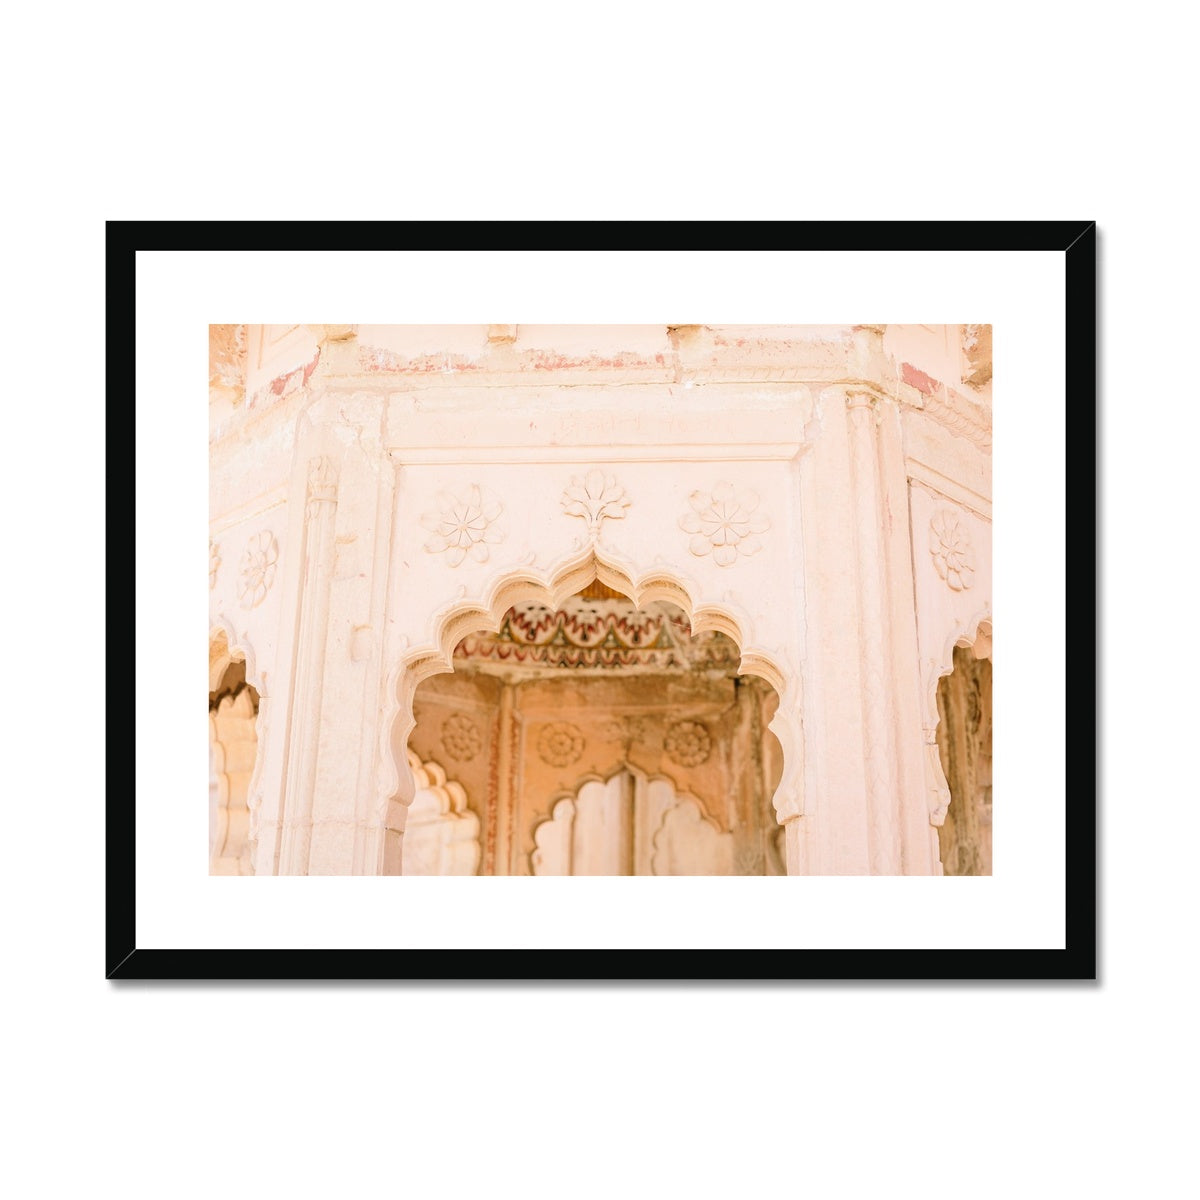 ARCHITECTURE OF INDIA Framed & Mounted Print